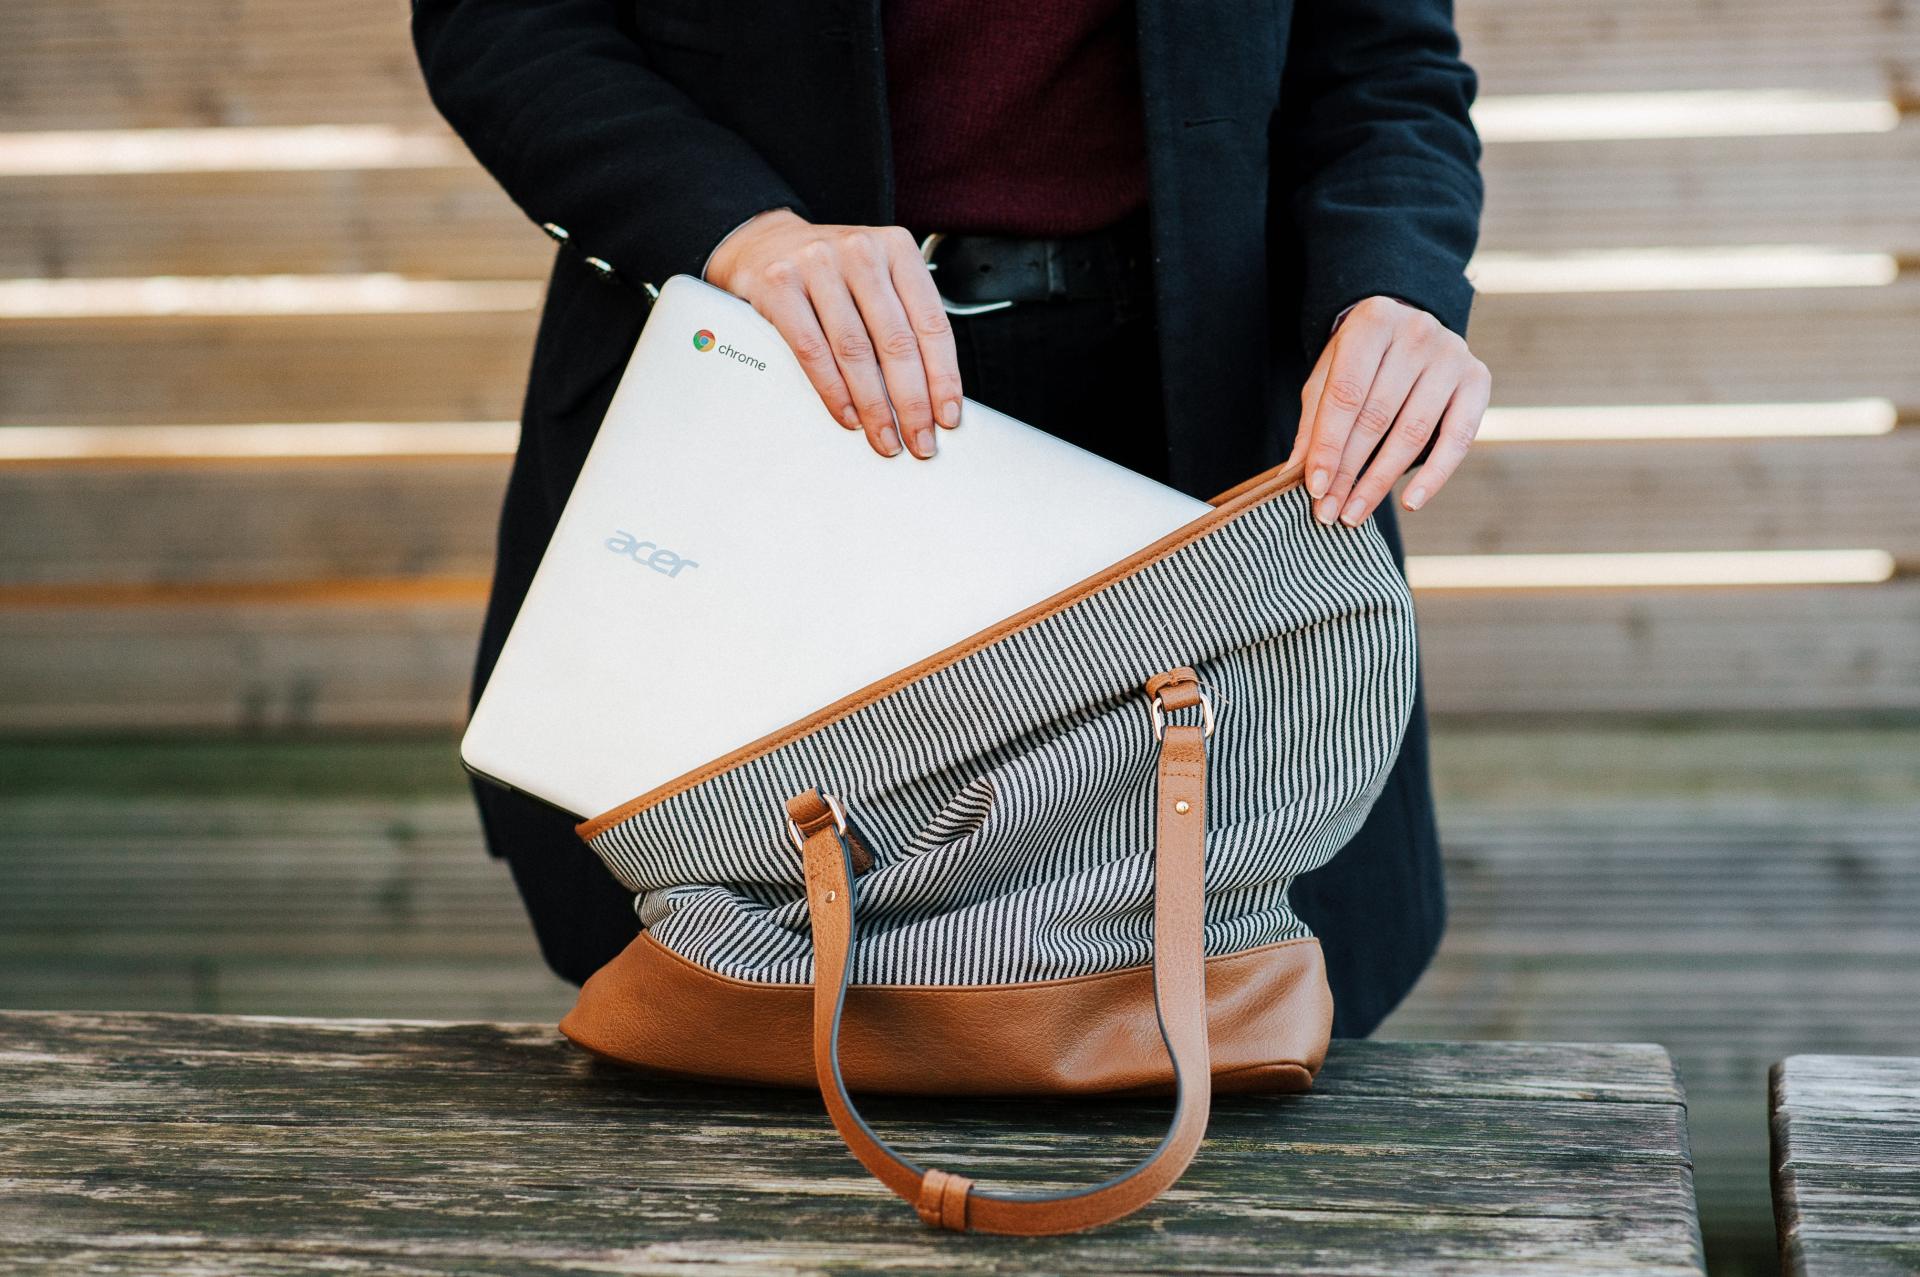 The Work Bag That's Perfect for Every Type of Job